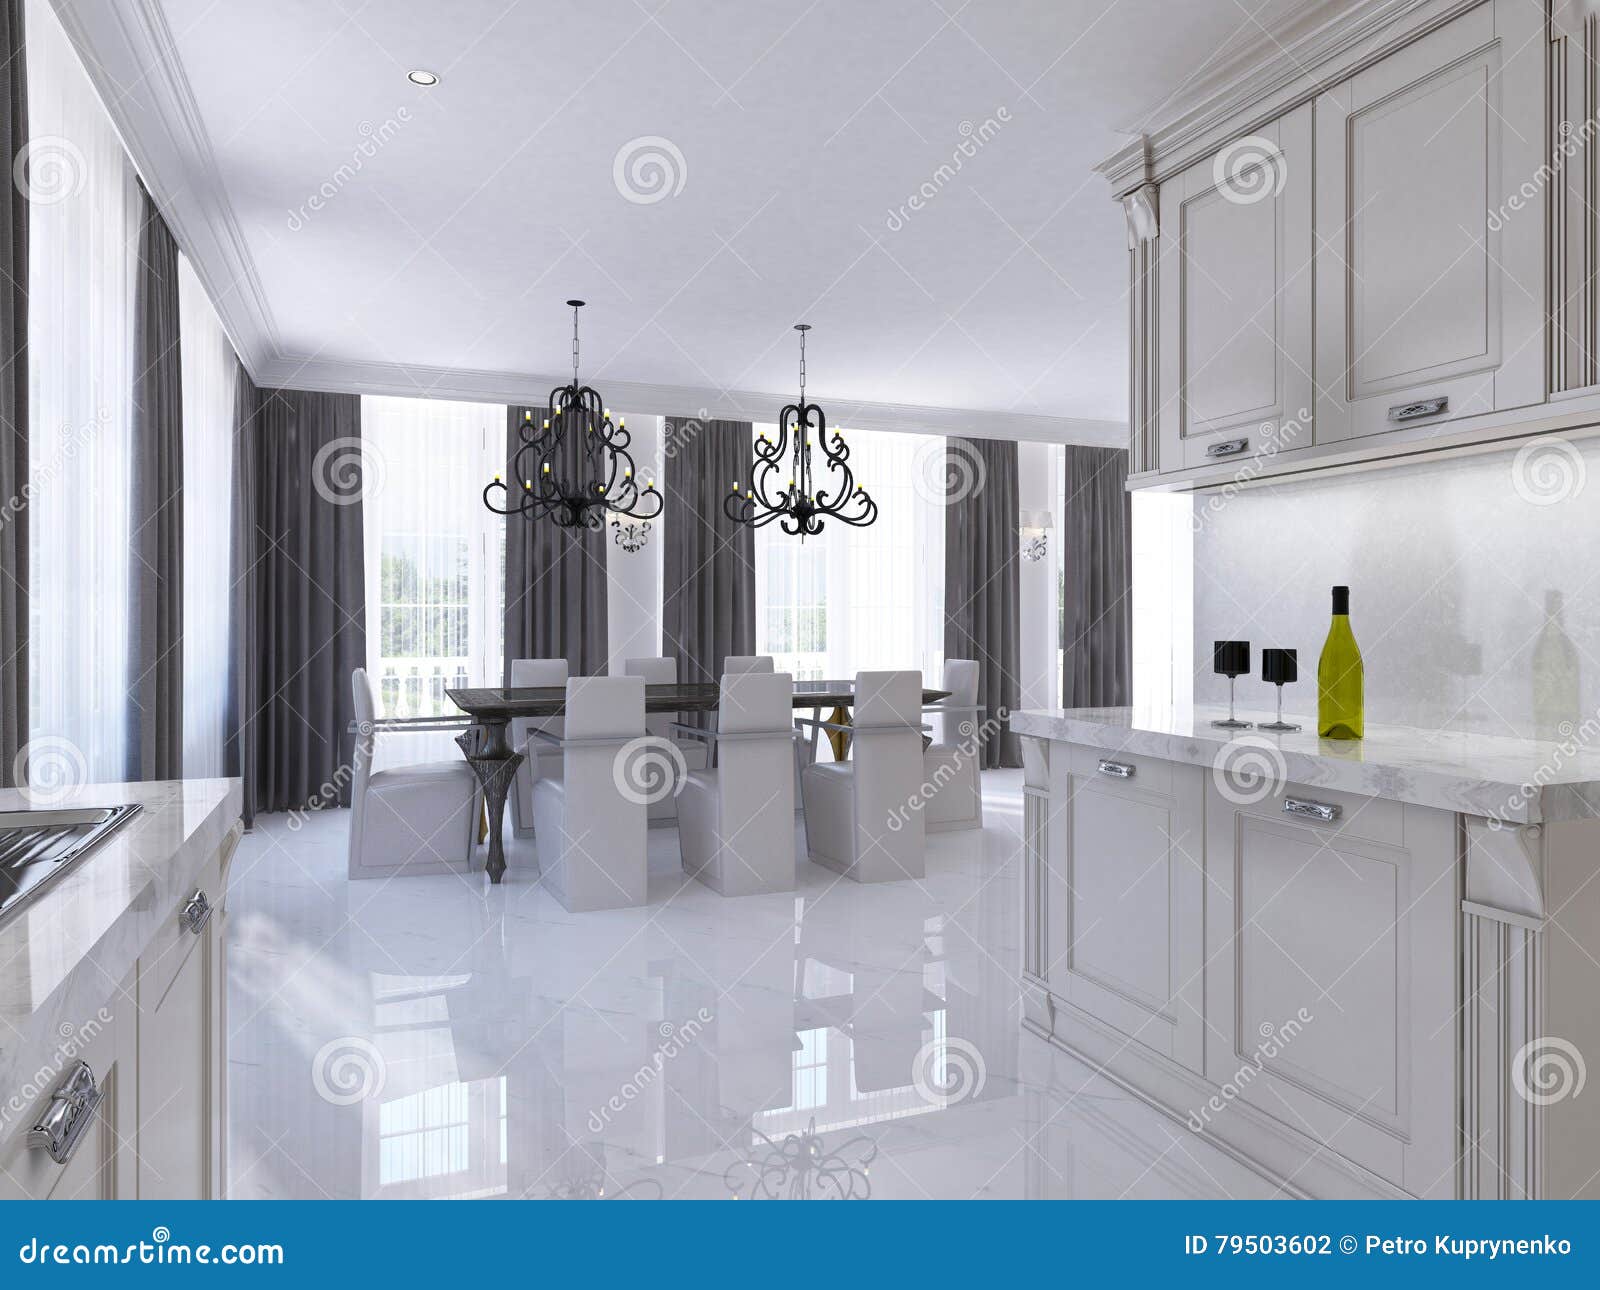 Classic White Kitchen-dining Room in the Style of Art Deco. Stock ...